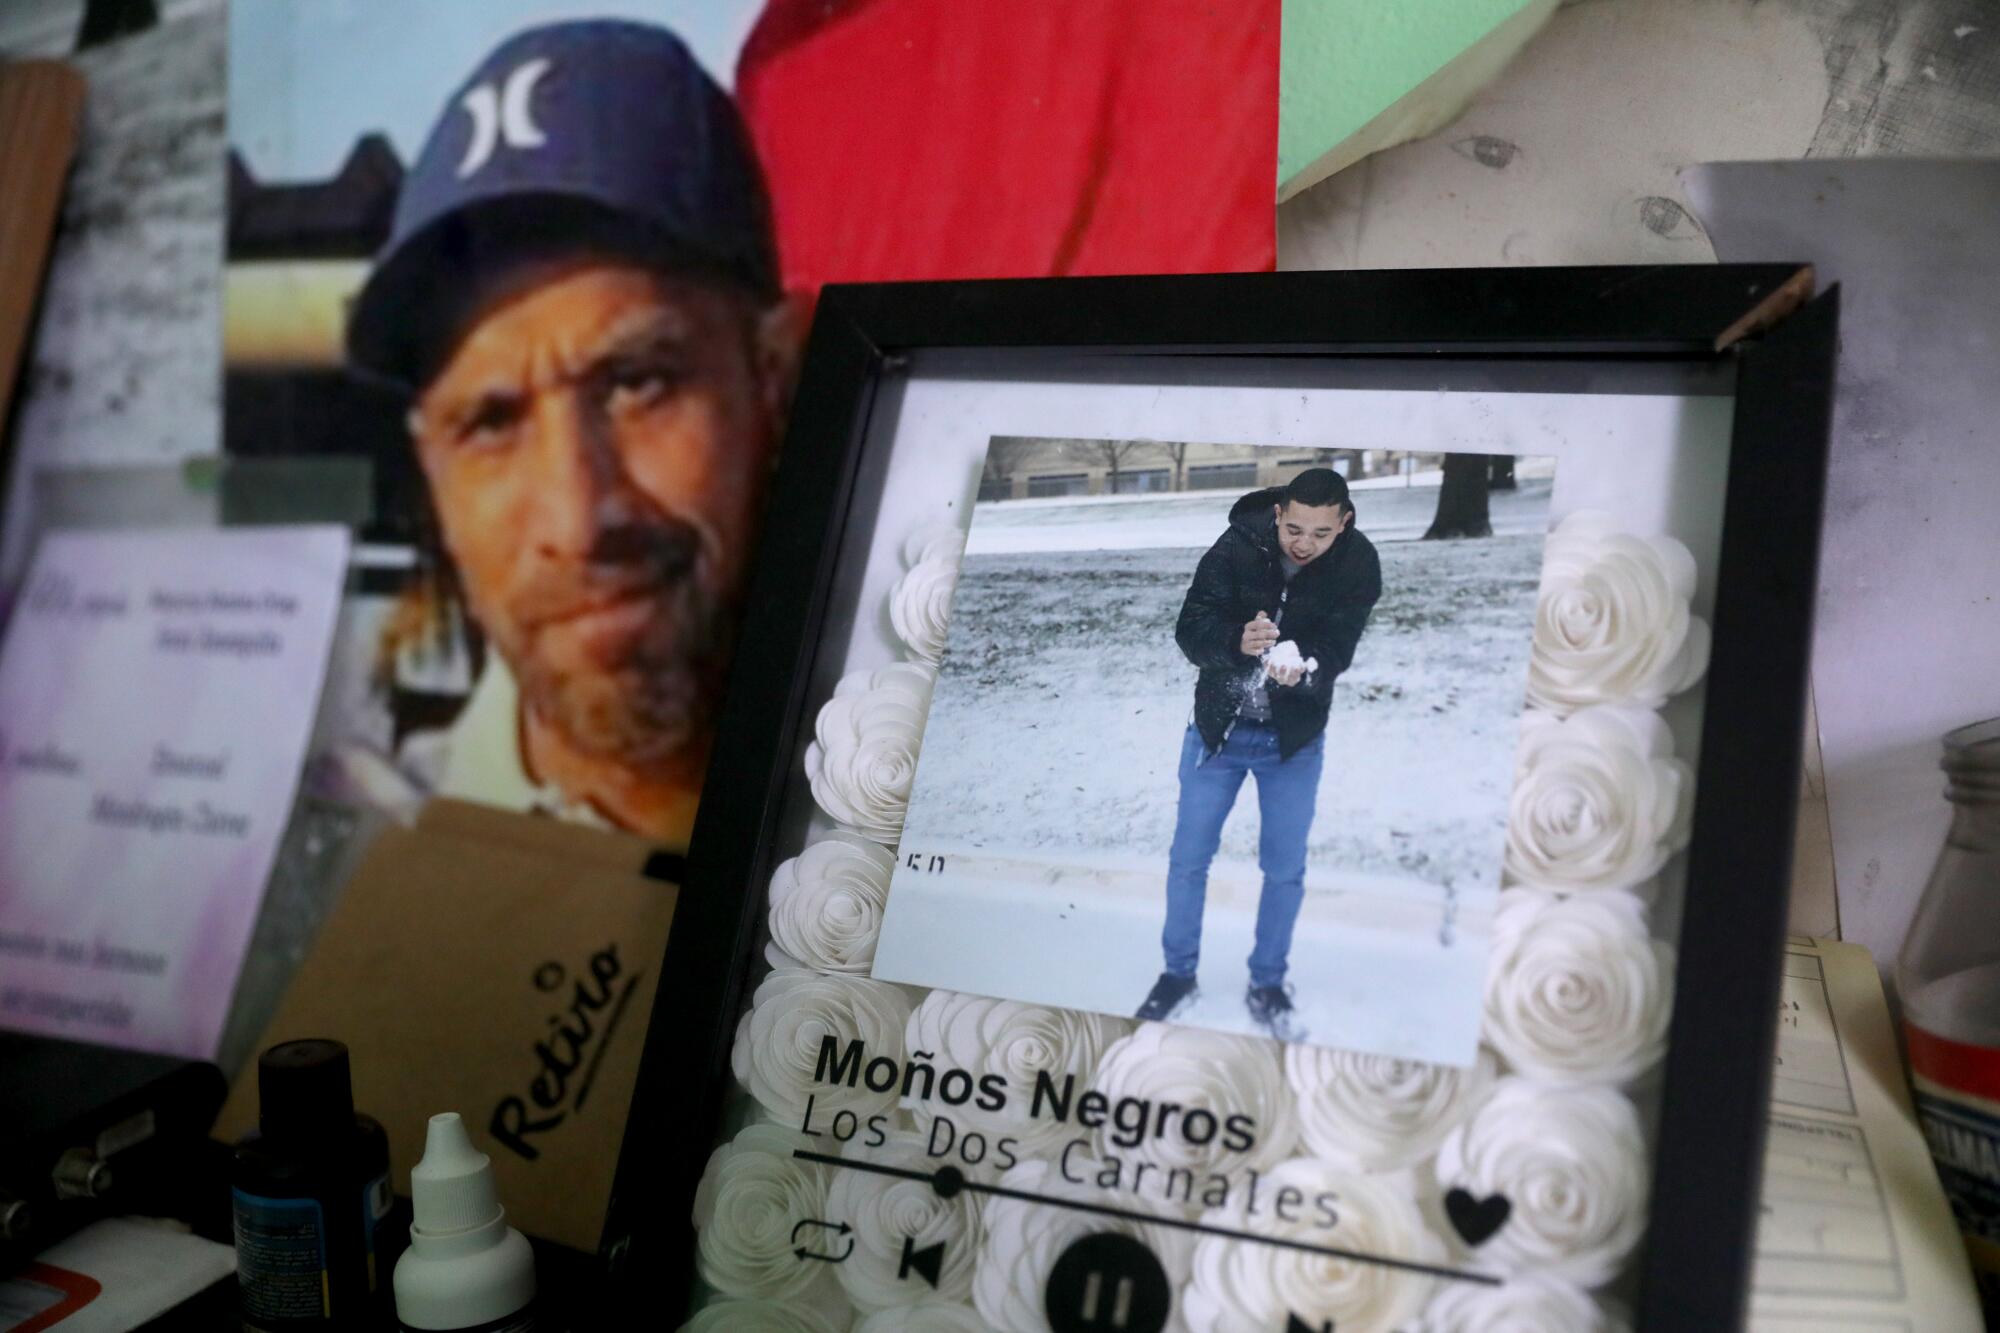 Photos of Ulises Ayala Andrade, left, and Chino on display in the family home outside Pátzcuaro.